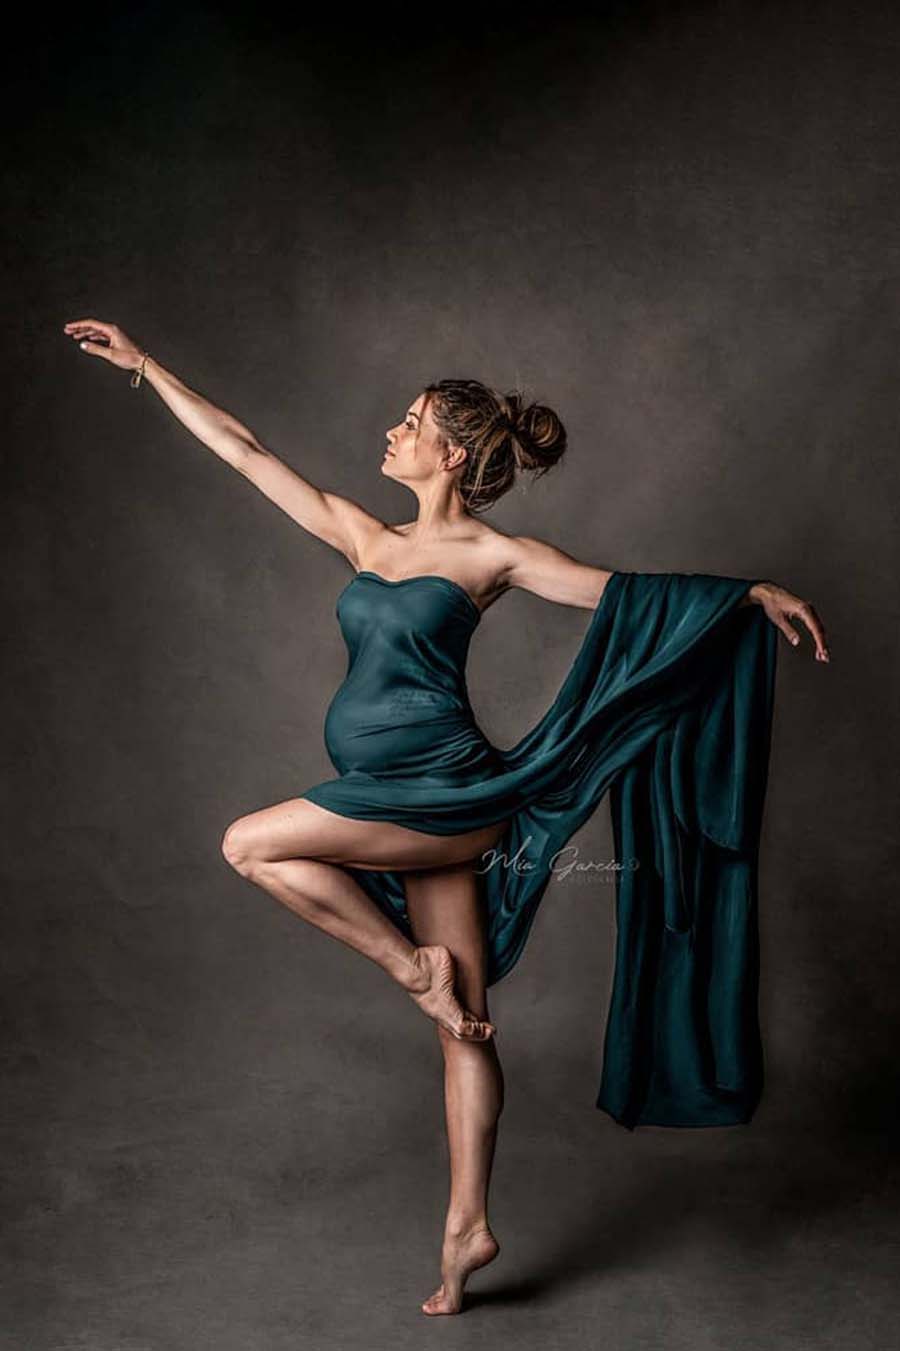 This pregnant model is doing a ballerina pose. She has her arms wide and is standing on one leg. She has the fabric of the silky scarf around her upper body. The rest of the fabric is hanging on her stretched arm.